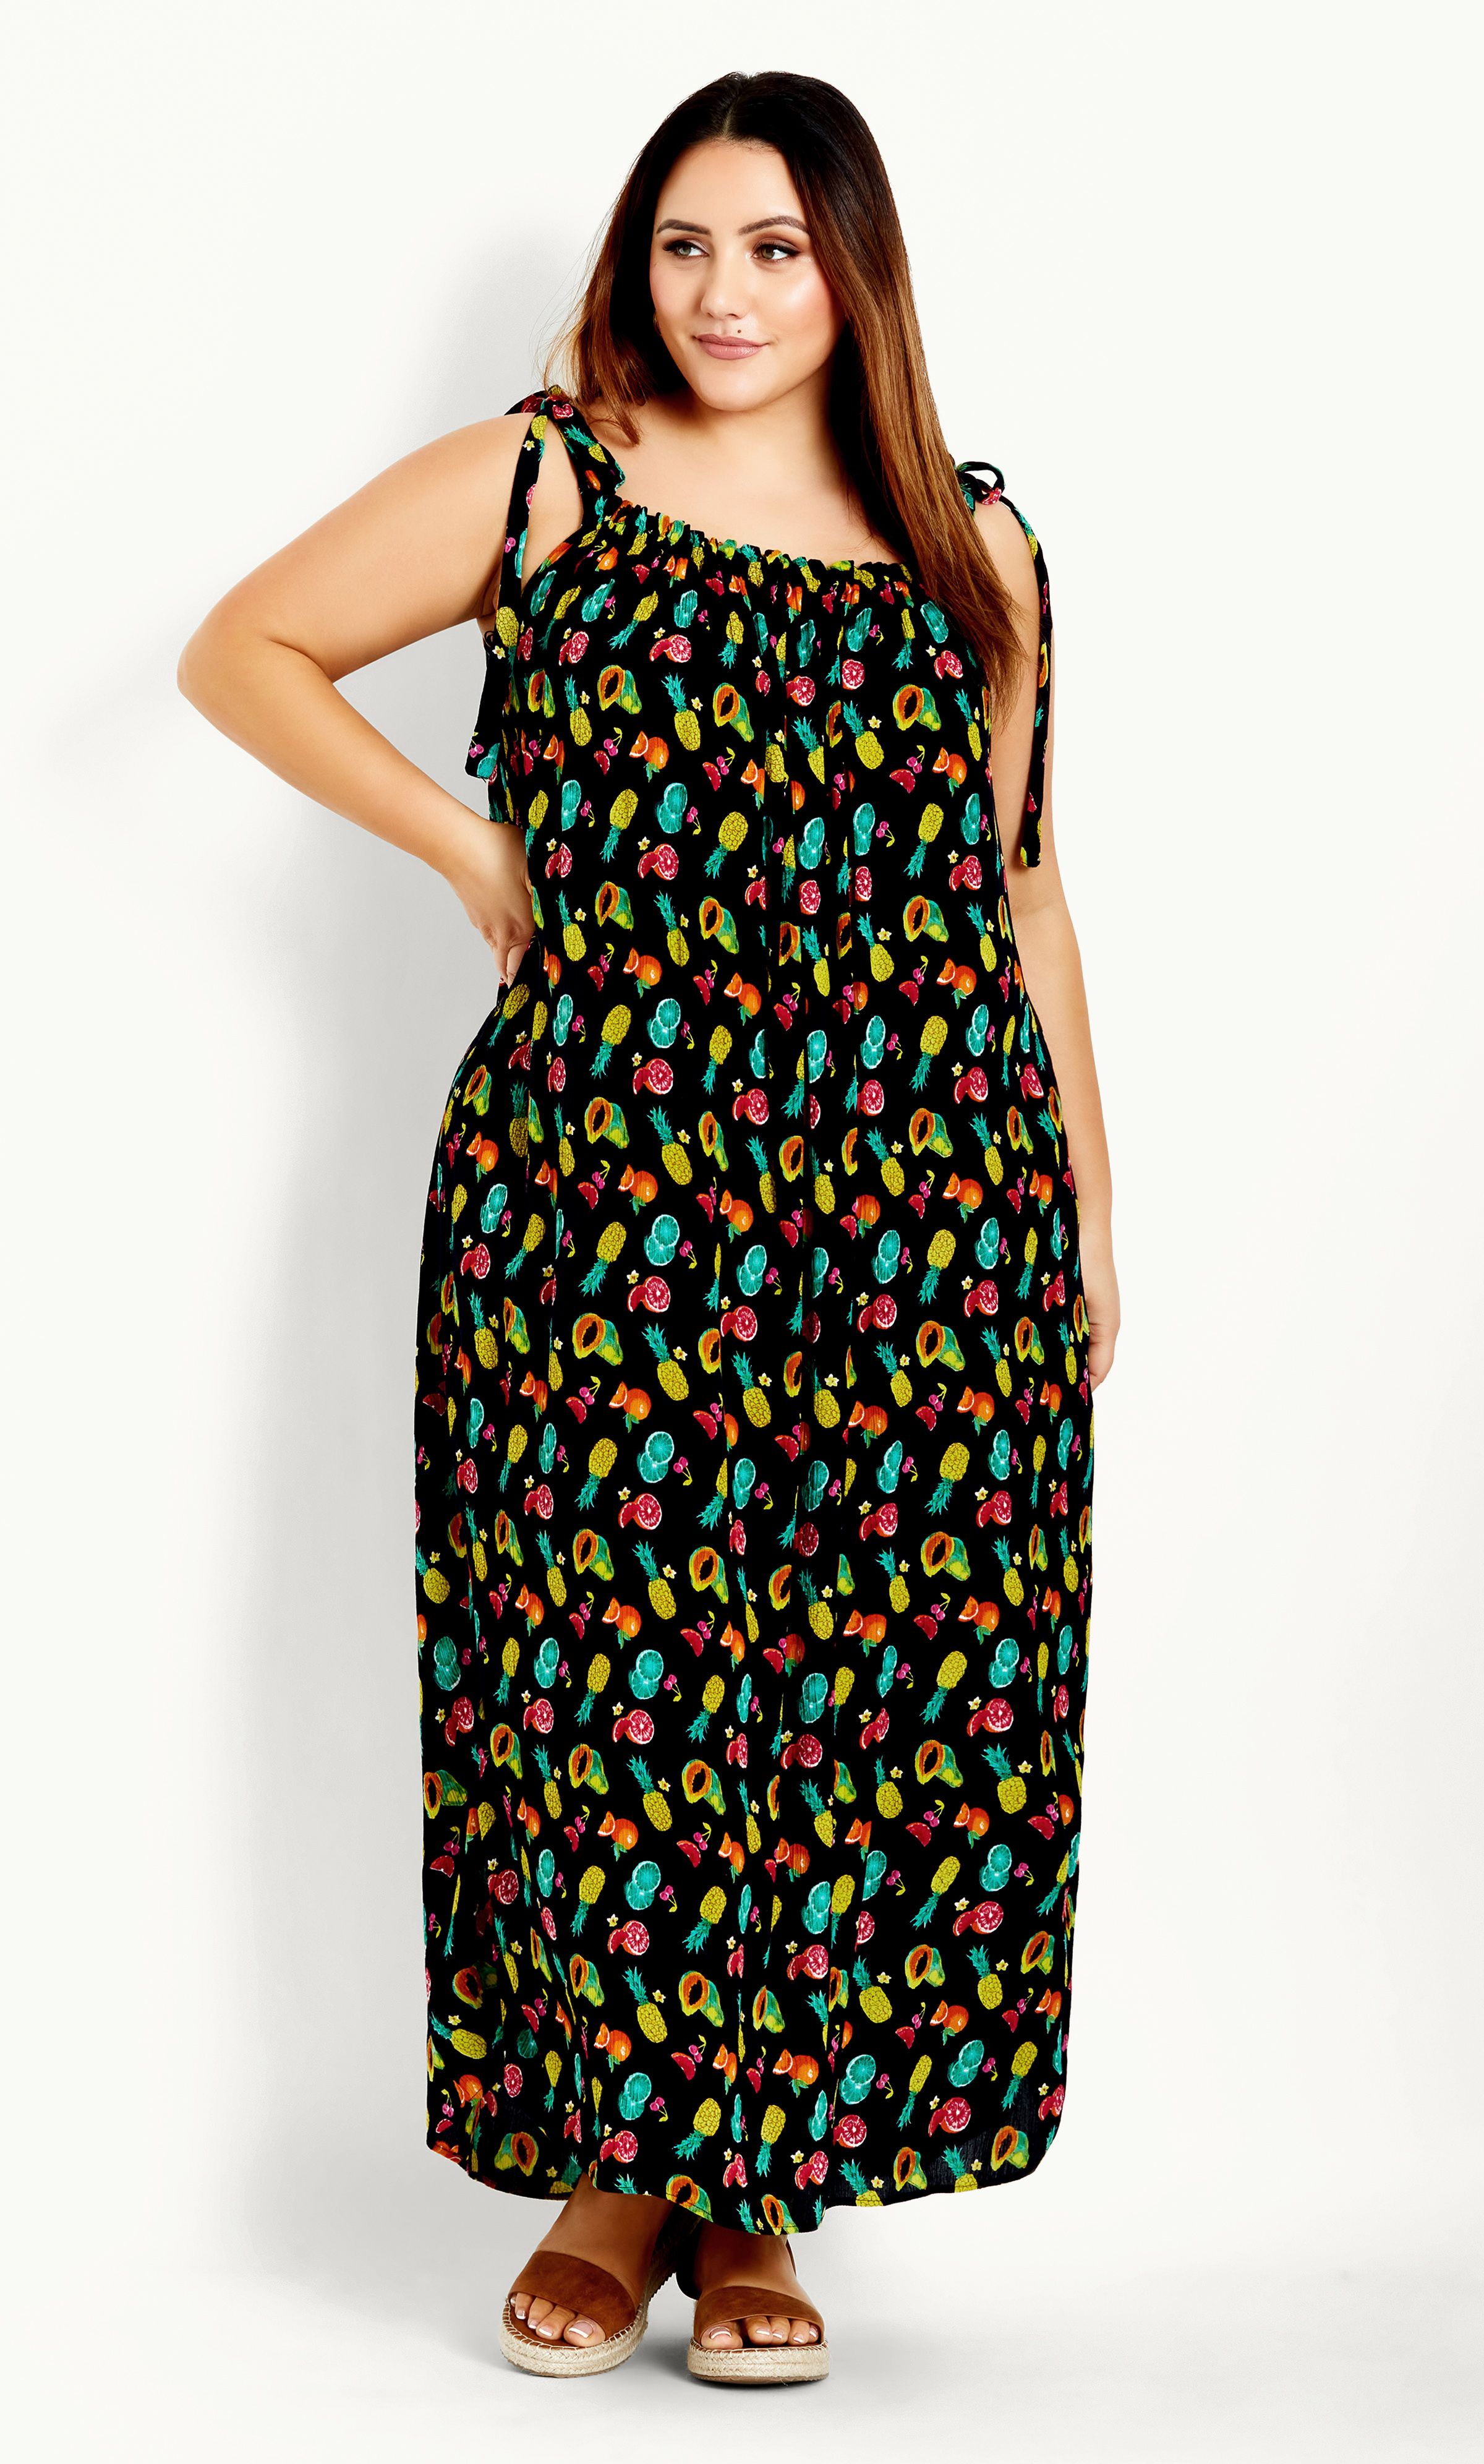 The Tie Shoulder Dress features a super cute fruit print and comfortable relaxed fit, perfect for soaking up the sunshine in style. Featuring tie shoulder straps for added feminine flair, this dress is a stylish pick for beachside strolls and picnic dates. Key Features Include: - Straight elasticated neckline - Self-tie shoulder straps - Textured non-stretch fabrication - Relaxed fit - Pull over style - Unlined - Maxi length Complete the look with strappy black sandals and an oversized straw hat.